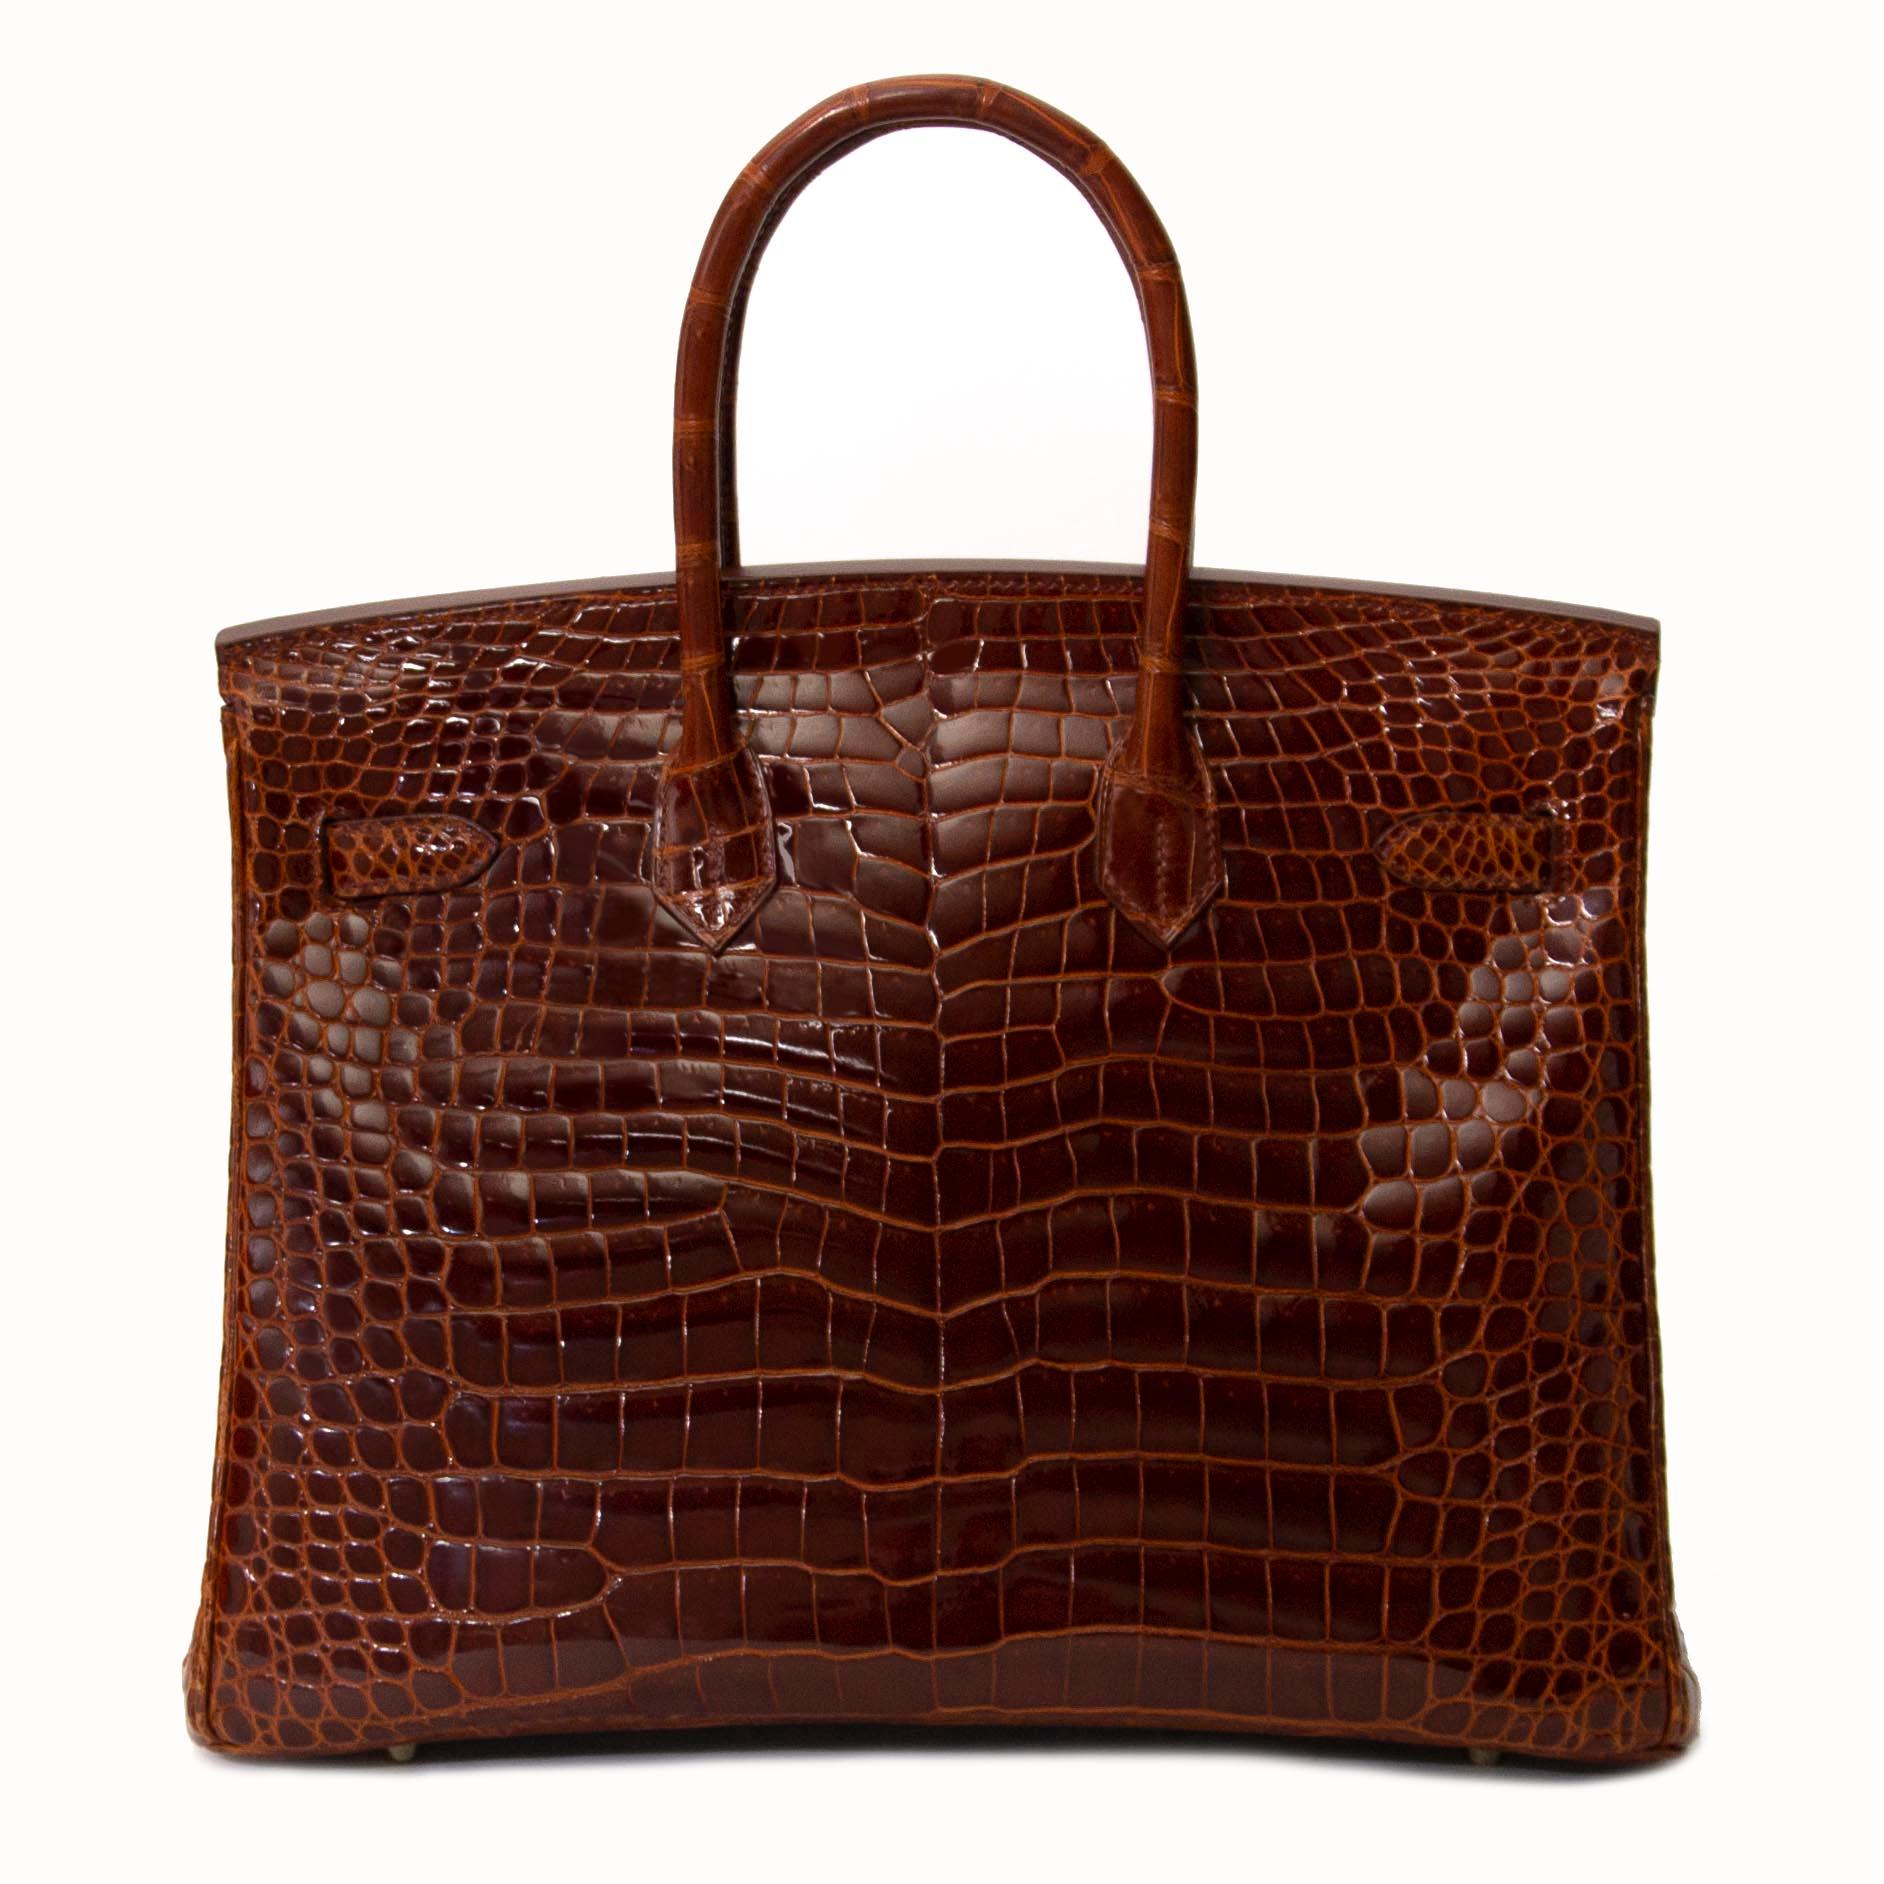 This exotic Hermès Birkin 35 is as exclusive as it is elusive. The Crocodile Porosus leather is colored in a warm and rich brown, called 'Havane'.

The bag has gold toned hardware, making it a wonderfully luxurious combination. This beauty in